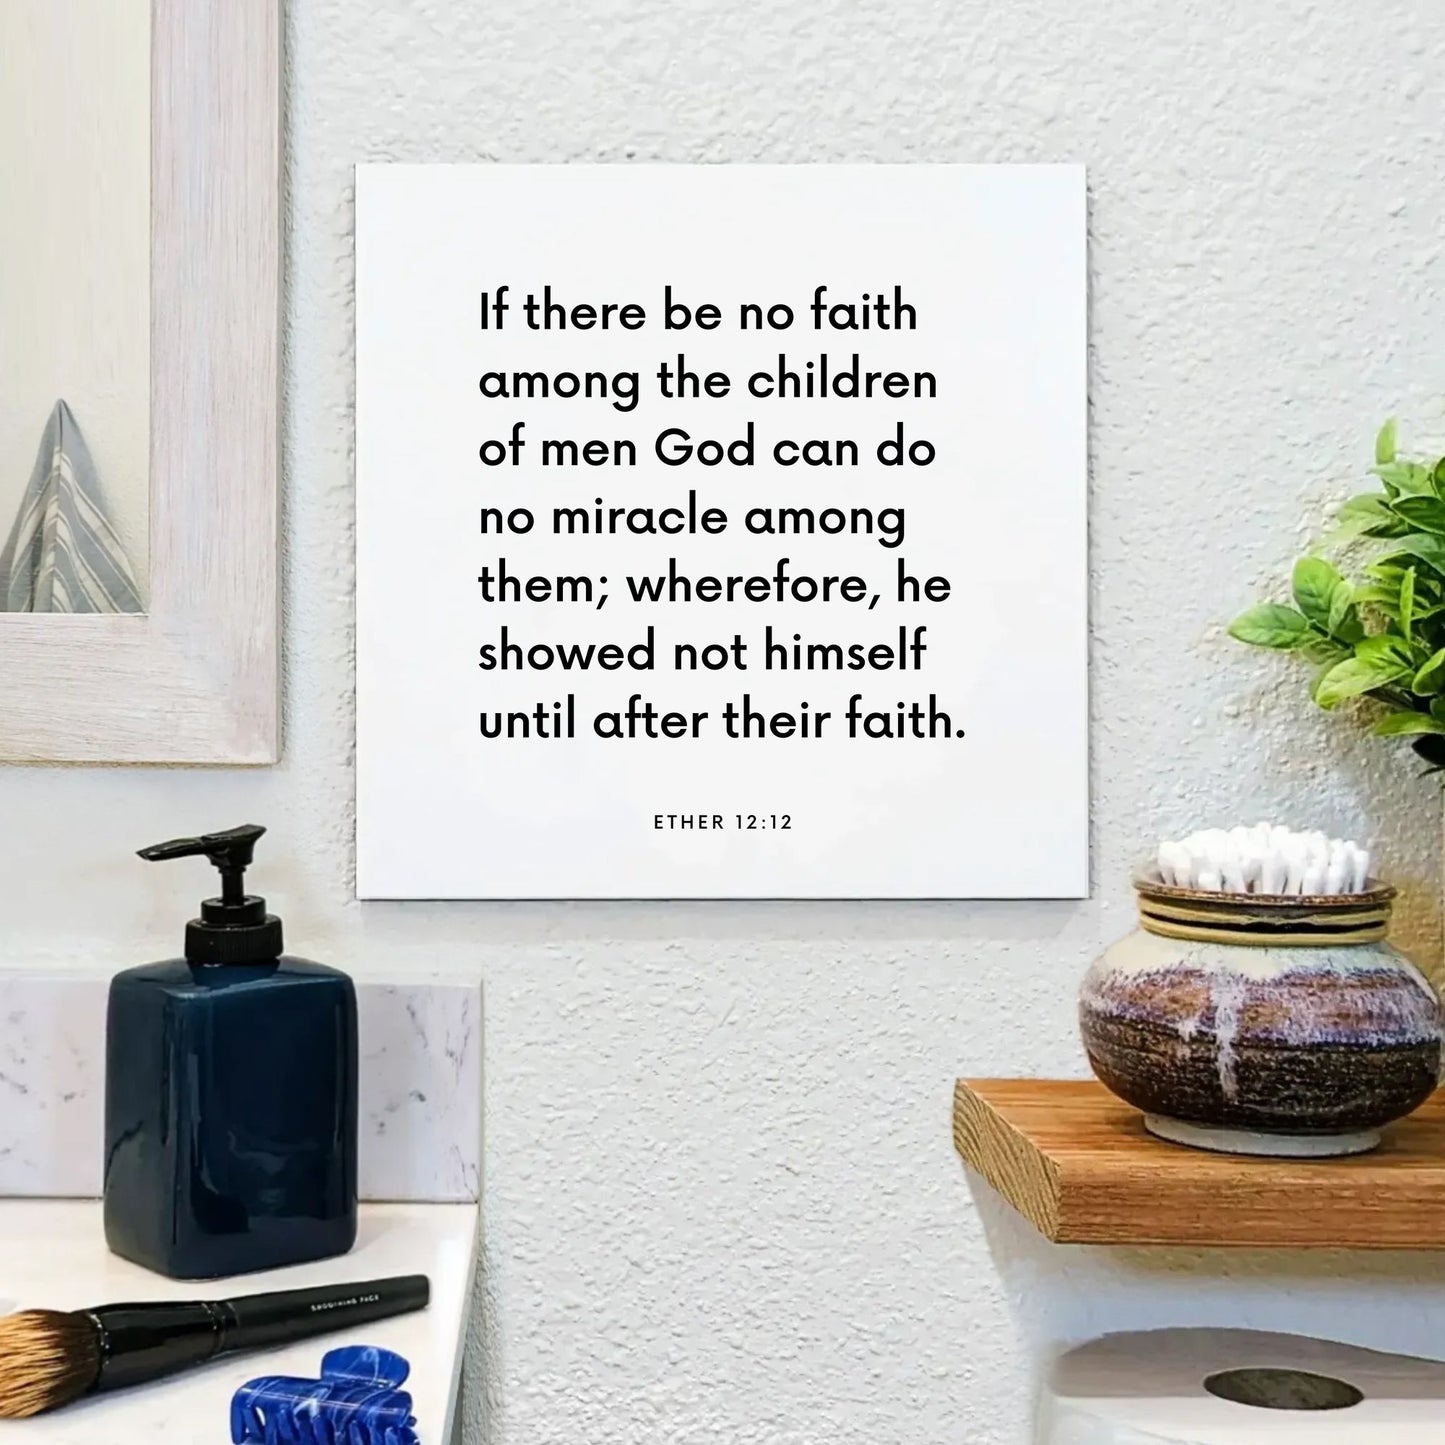 Bathroom mouting of the scripture tile for Ether 12:12 - "If there be no faith, God can do no miracle"